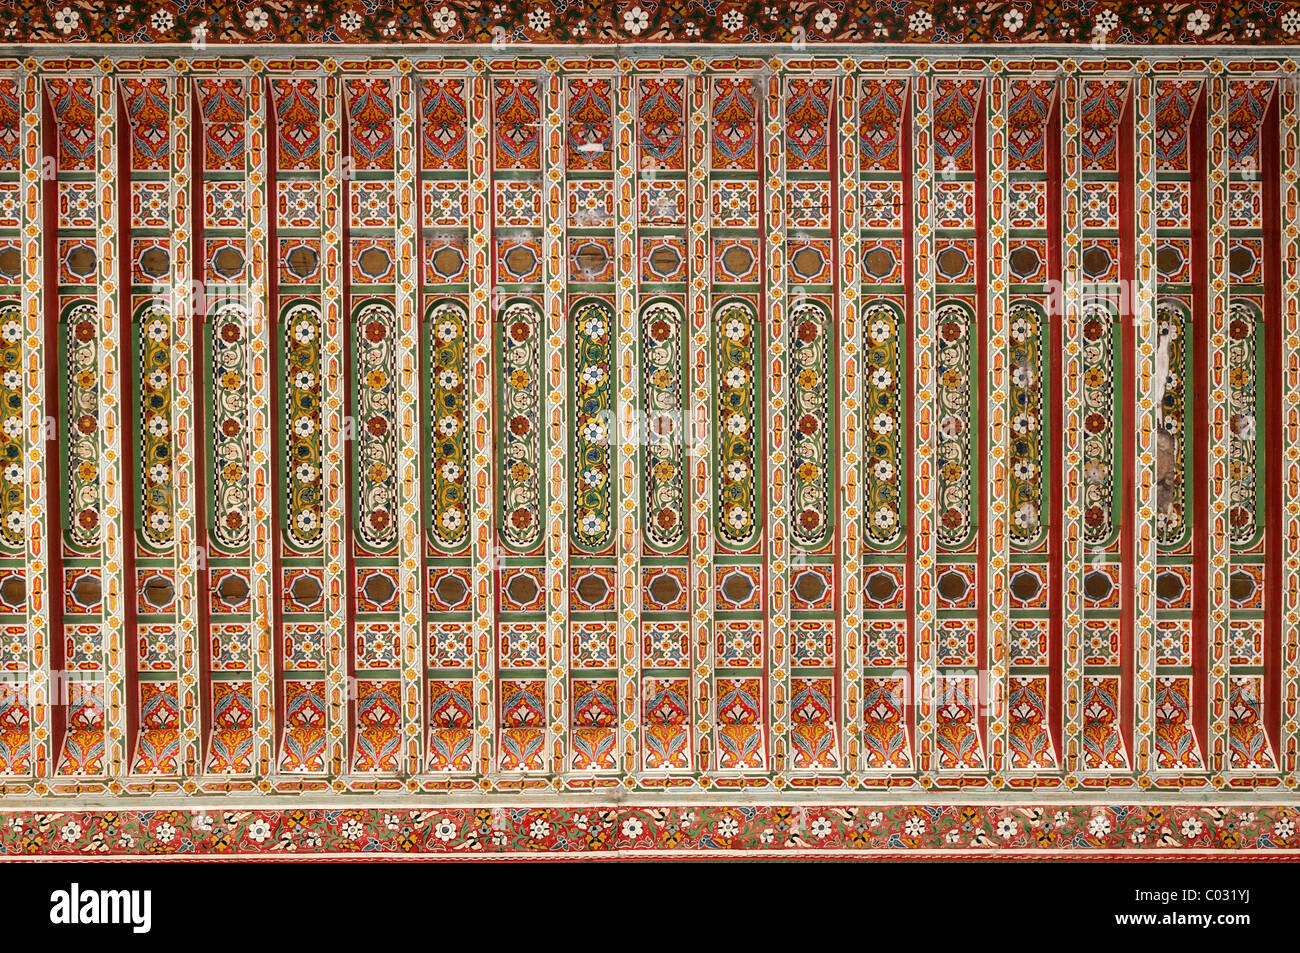 Painted ceiling in the El Bahia Palace, Marrakesh Medina, Unesco World Heritage Site, Morocco, North Africa Stock Photo